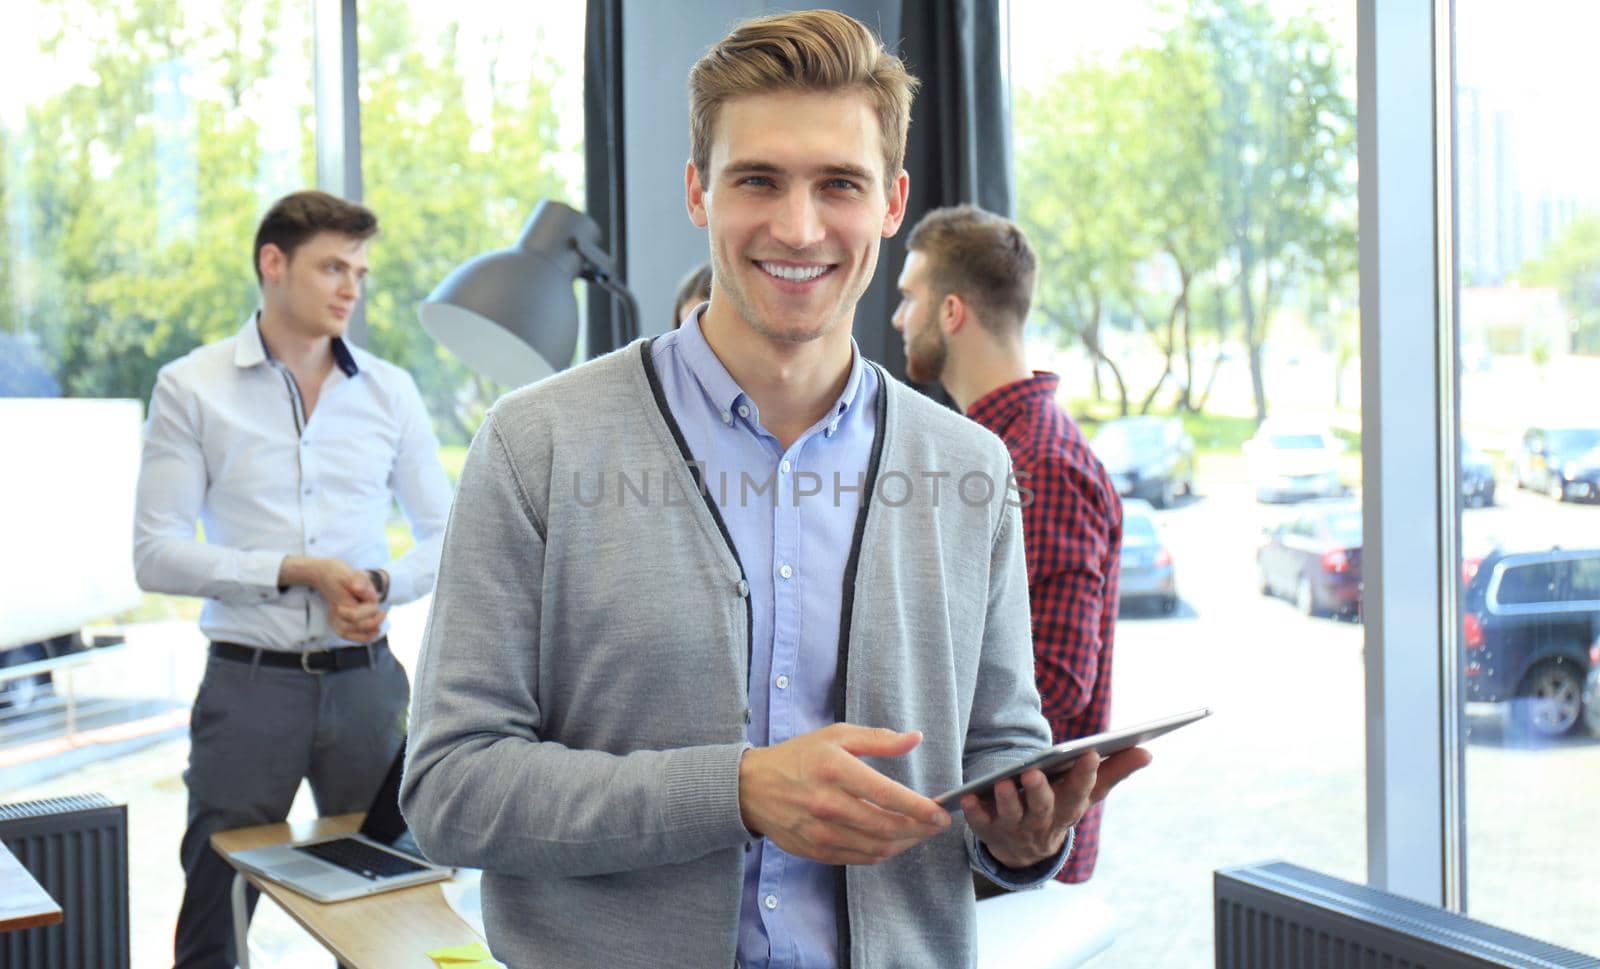 Smiling young man using digital tablet in the office. by tsyhun